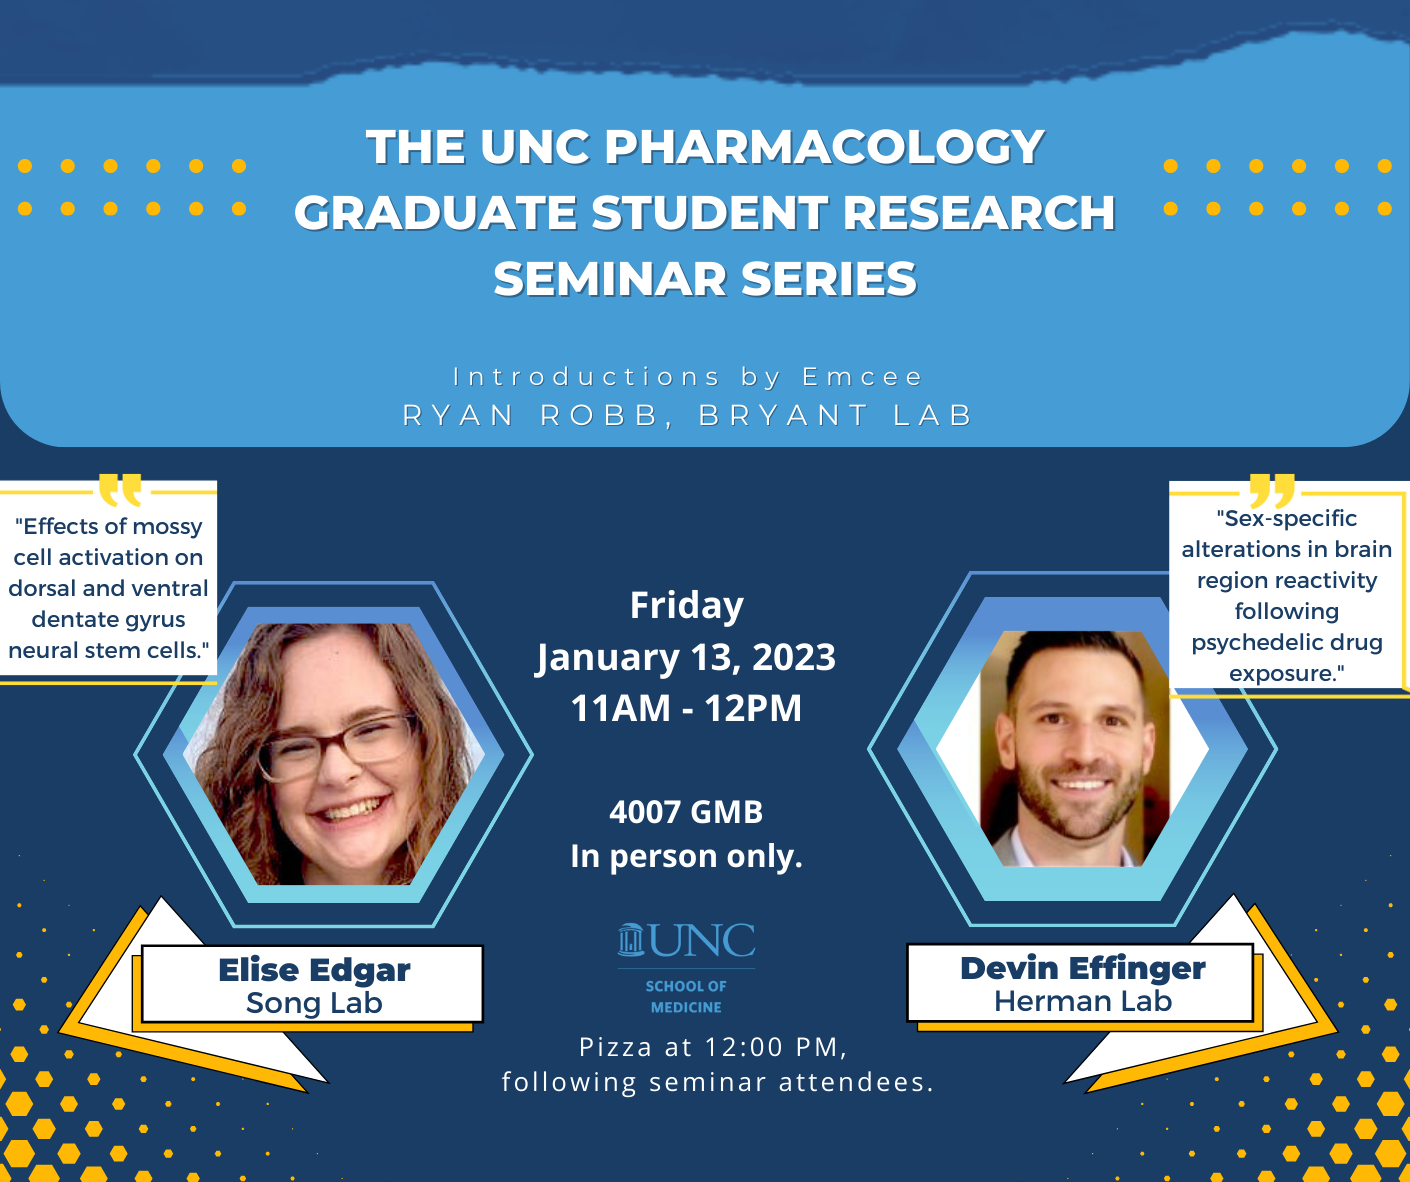 UNC Pharmacology Graduate Student Research Seminar series flyer showing Elise Edgar and Devin Effinger's photos and the time, date and location for their student research seminars on 1/13/2023 @ 11am in 4007 Genetic Medicine Bldg, on UNC campus, with the titles of their talks which are also listed on the event page.